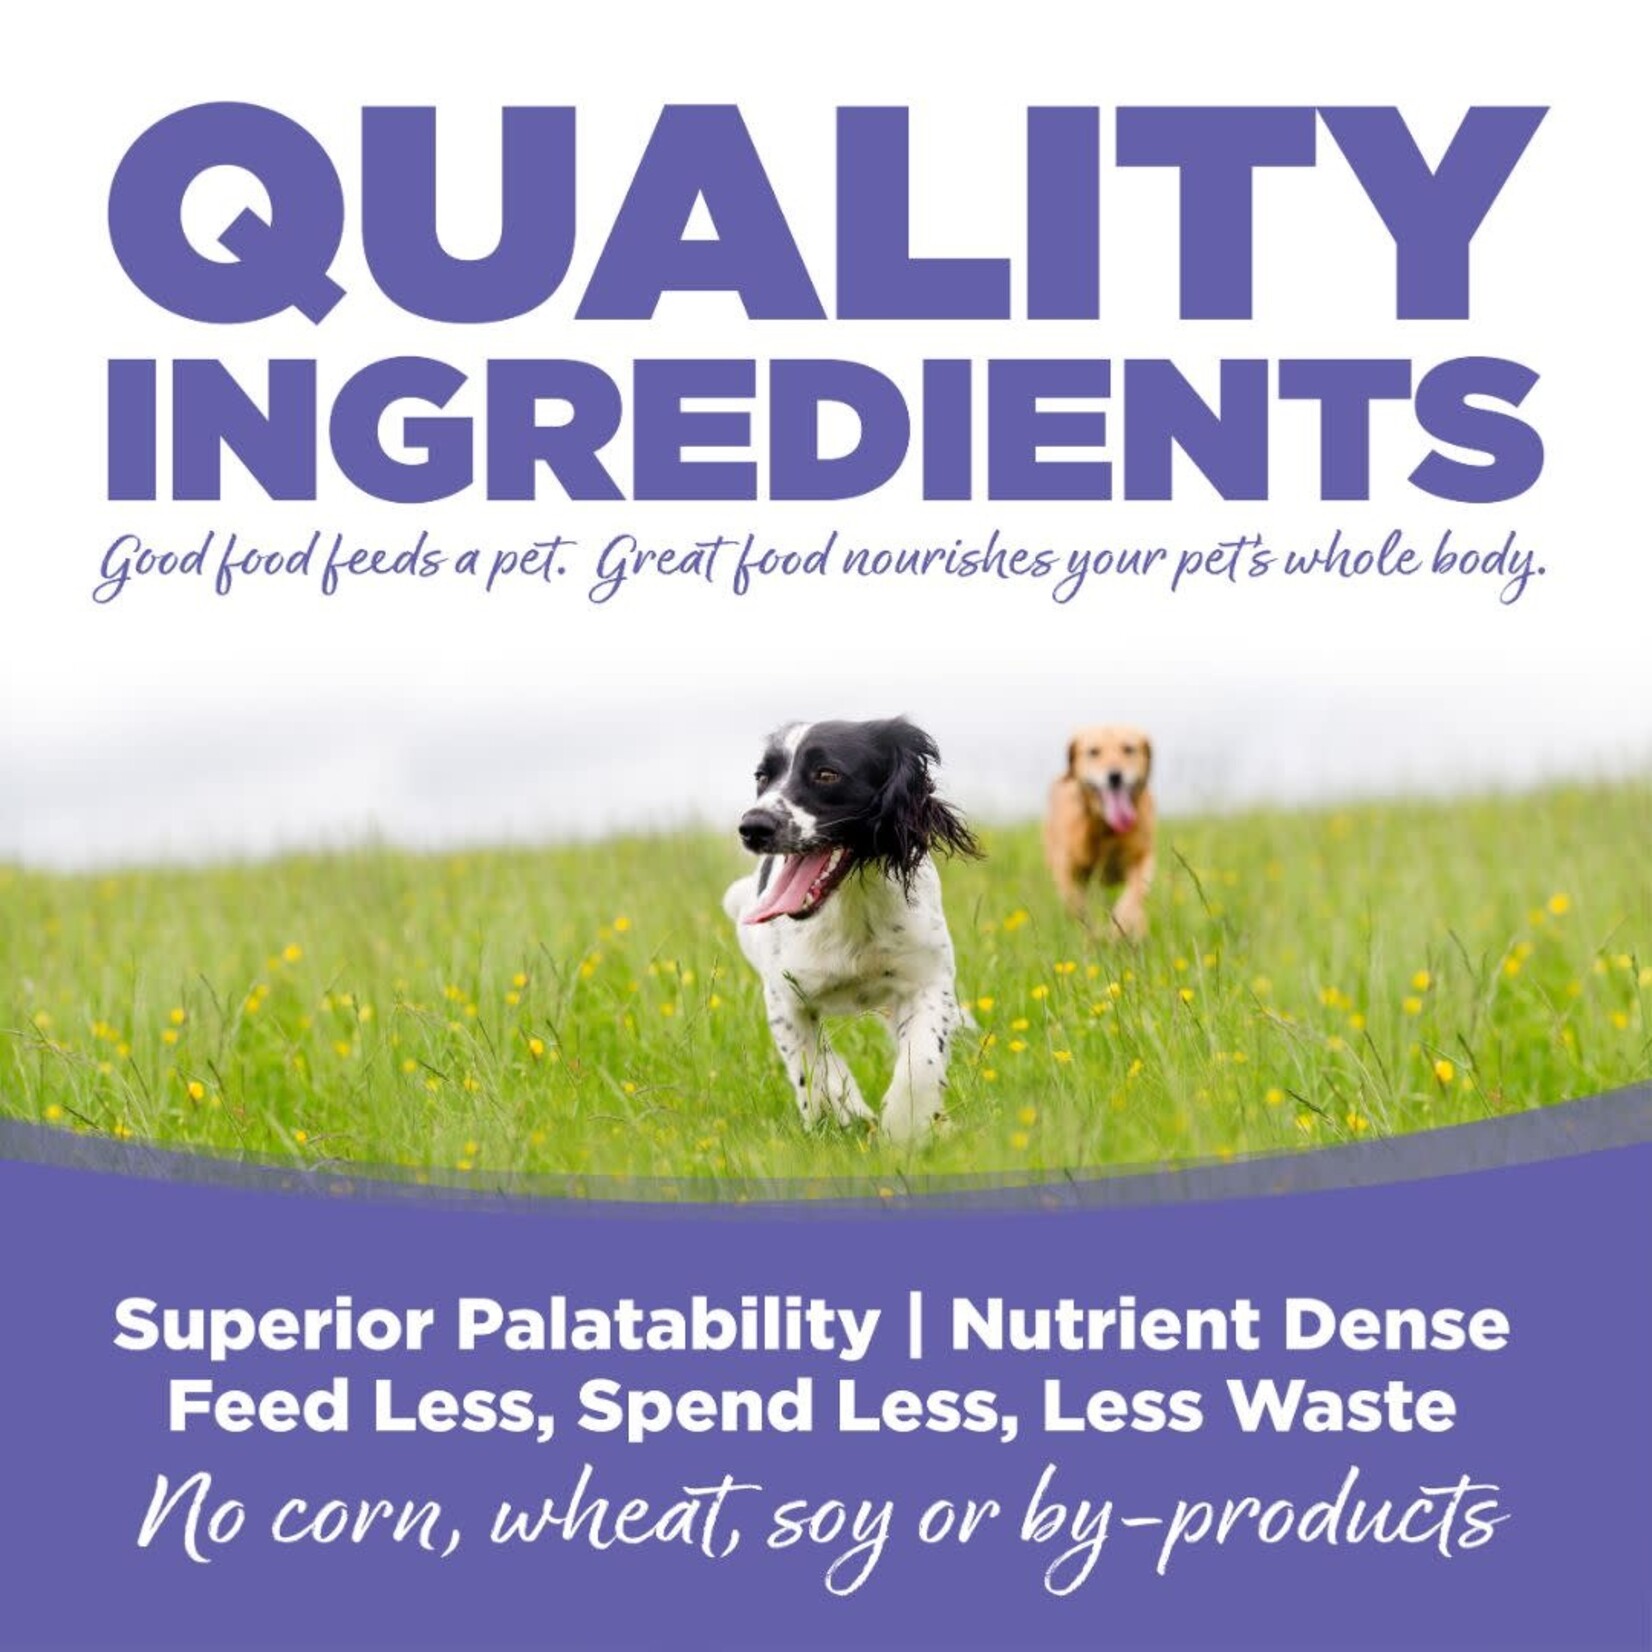 NutriSource NutriSource Small & Medium Breed Puppy Canned Dog Food